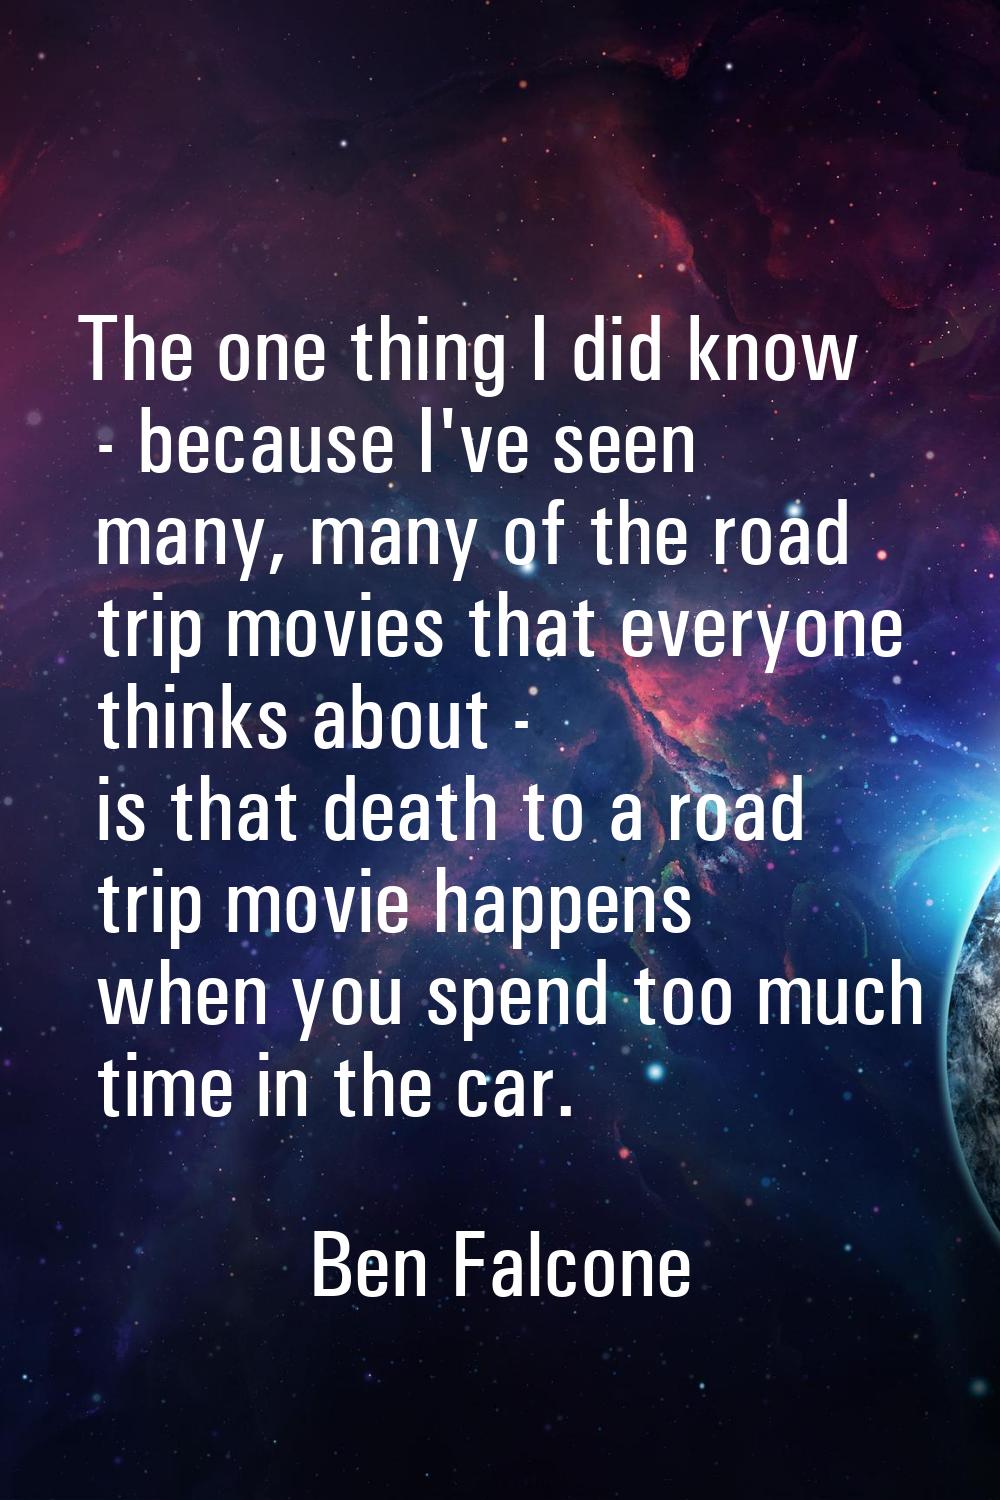 The one thing I did know - because I've seen many, many of the road trip movies that everyone think